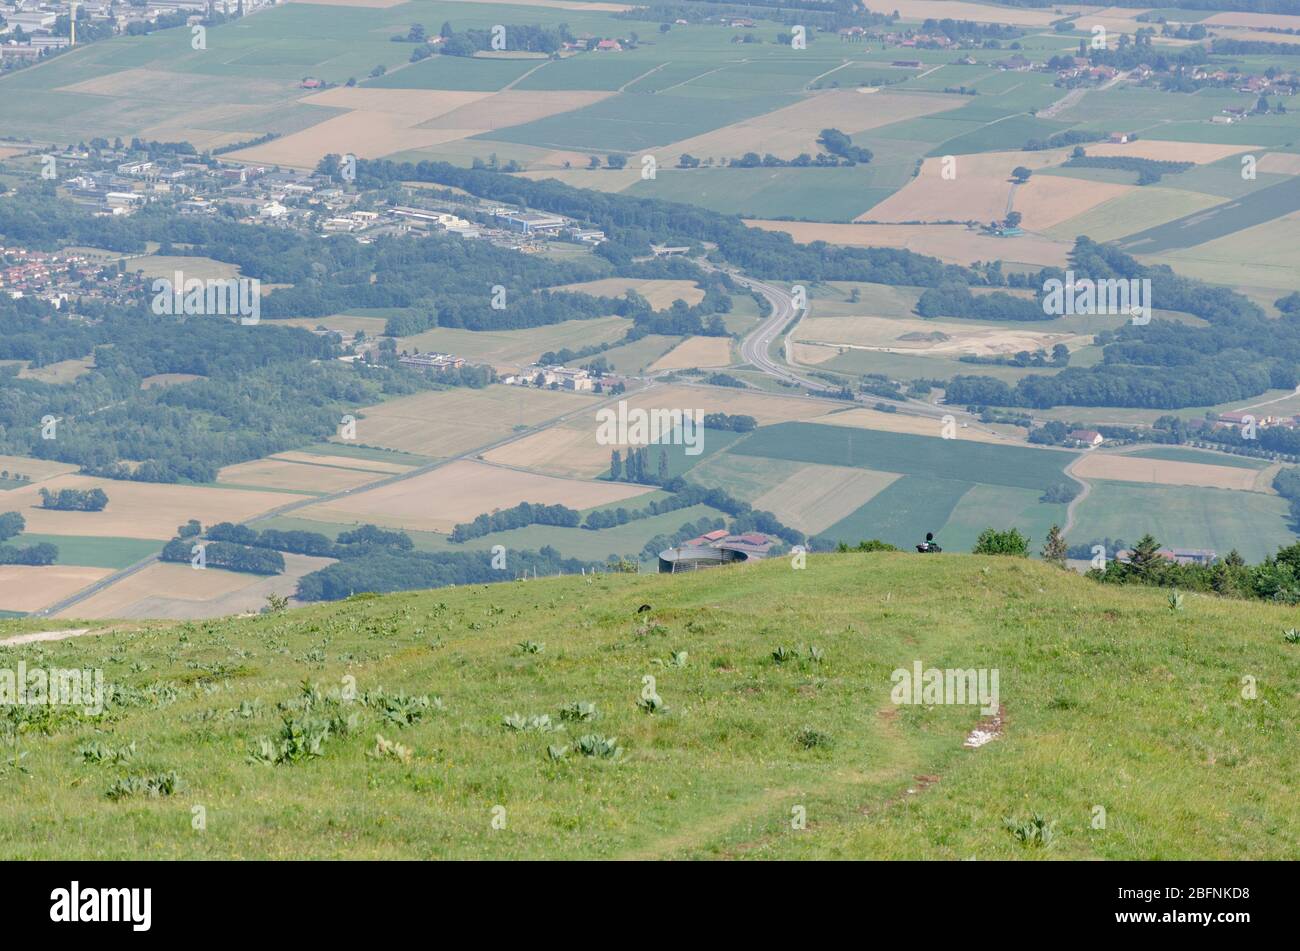 Green mountain landscape during summer season overlooking the Thoiry region in France from Jura Mountains Stock Photo